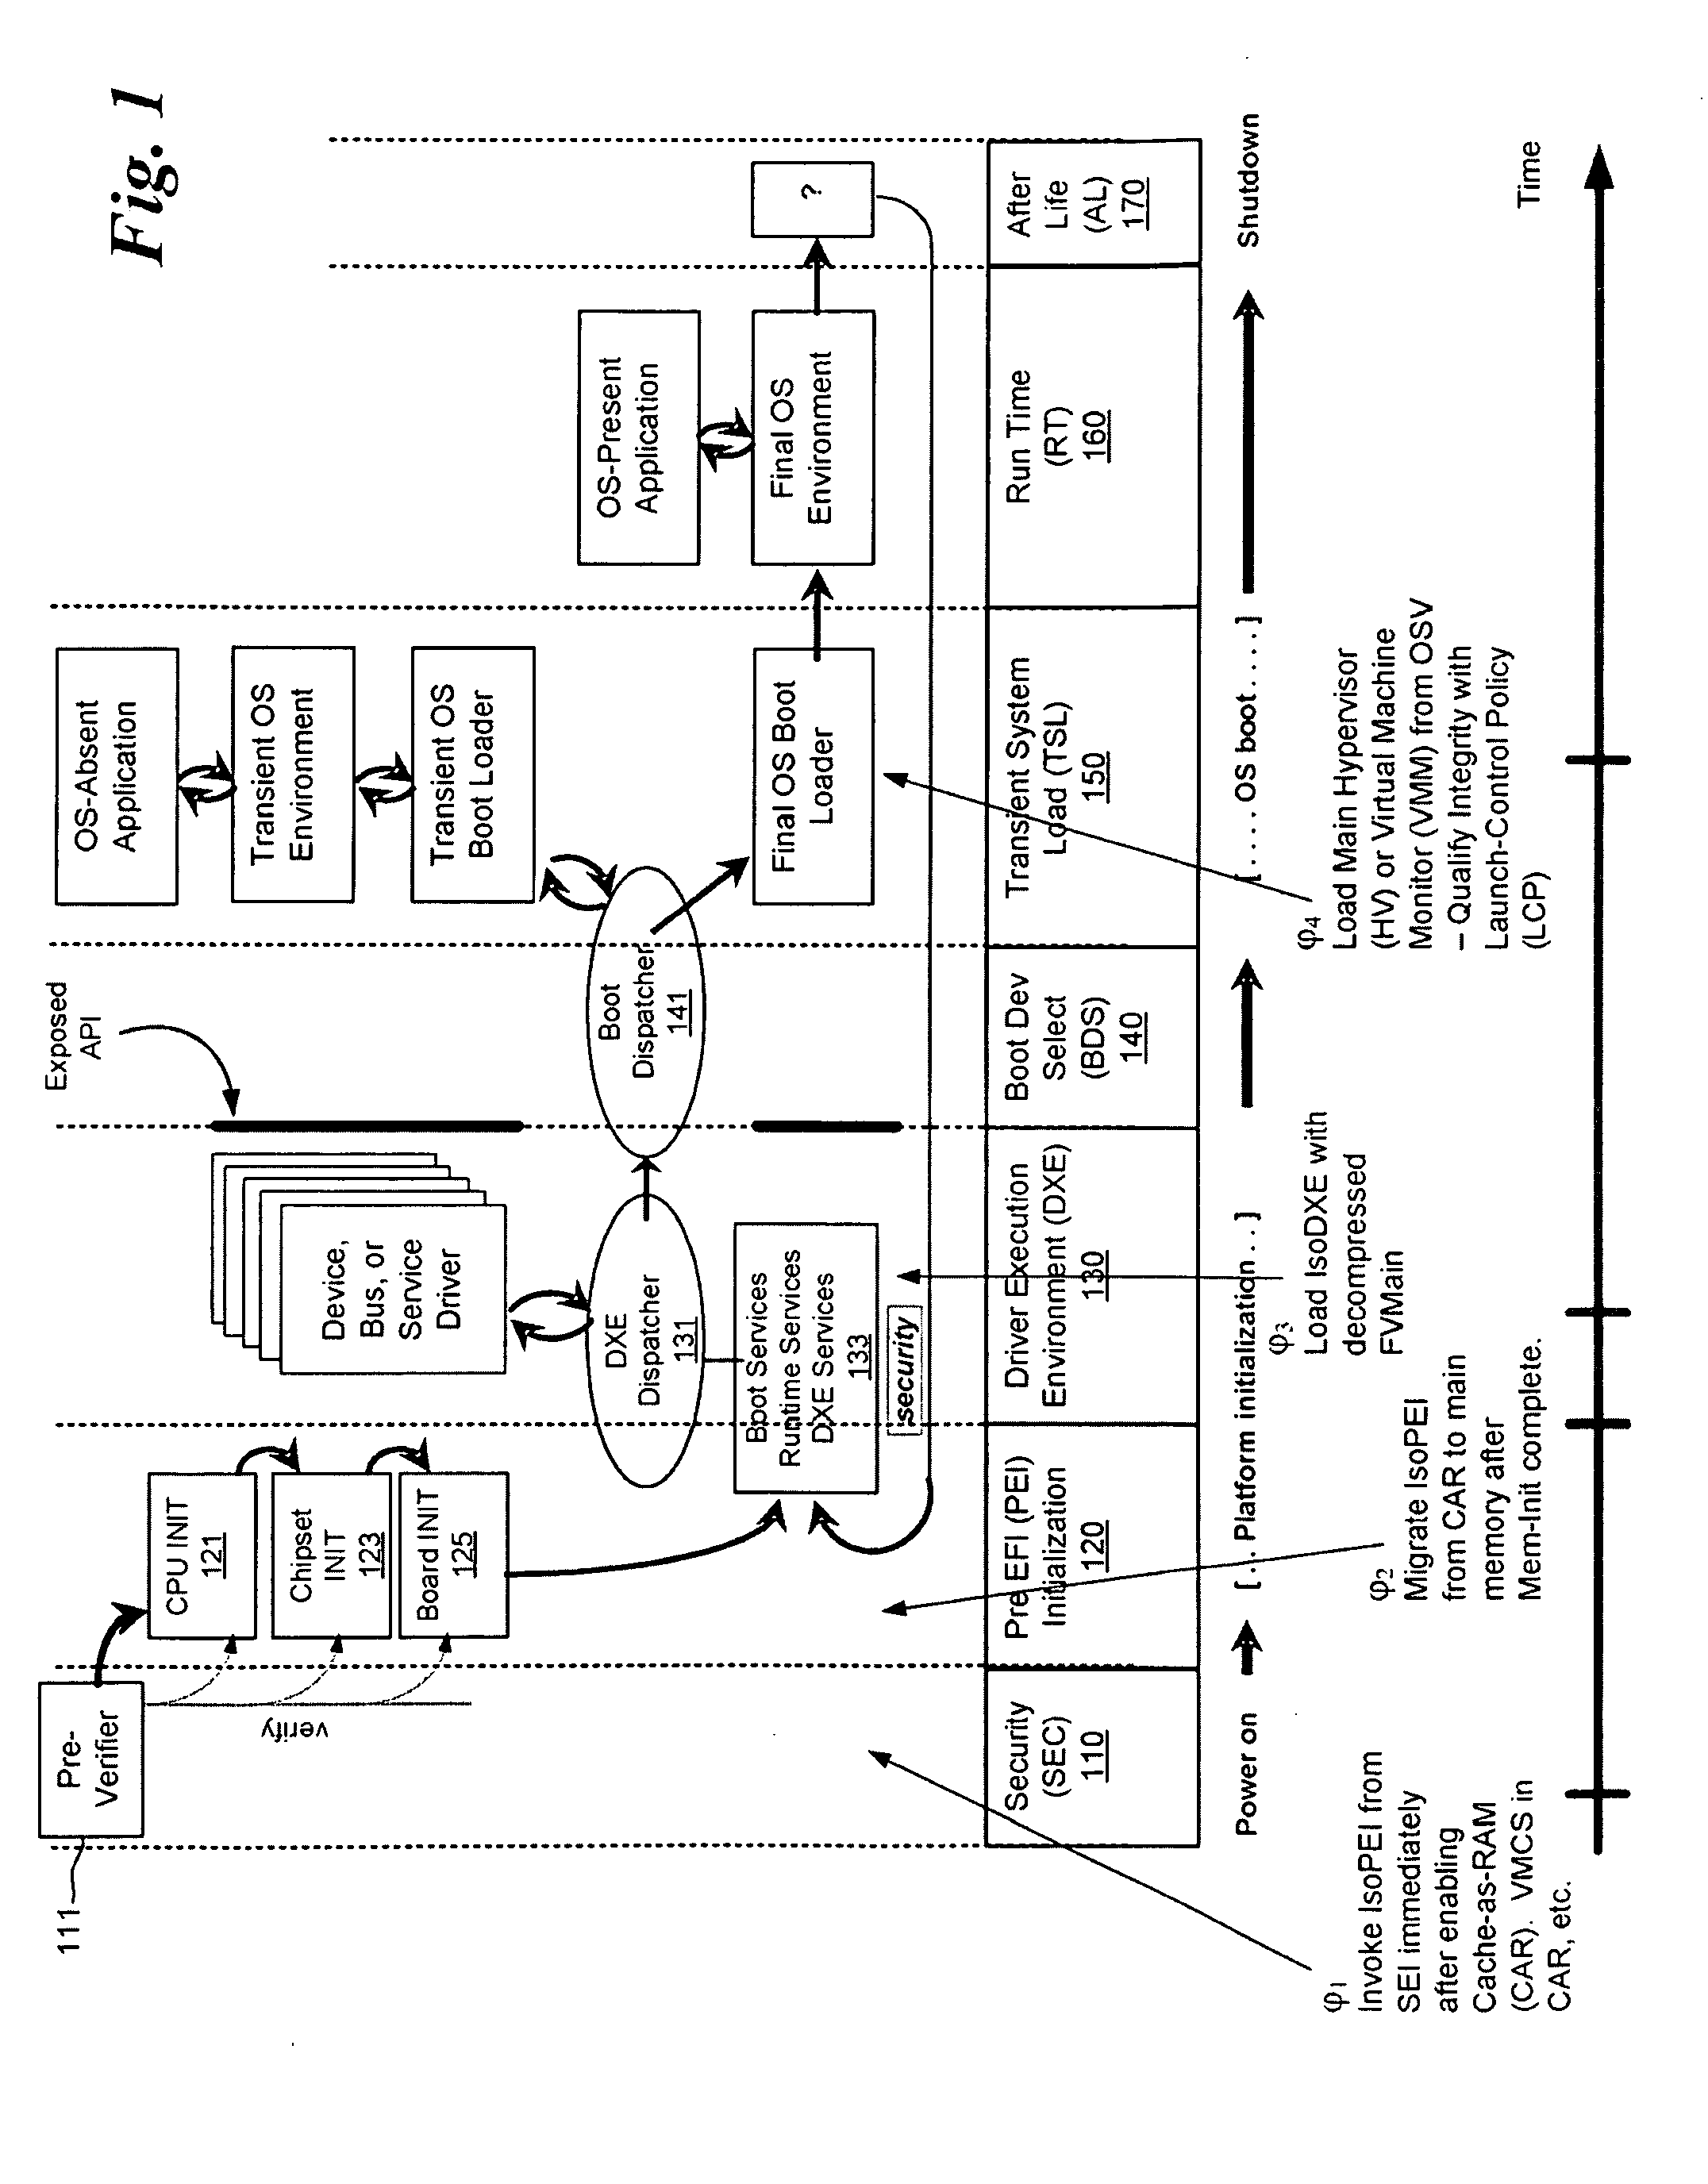 Method and apparatus for sequential hypervisor invocation